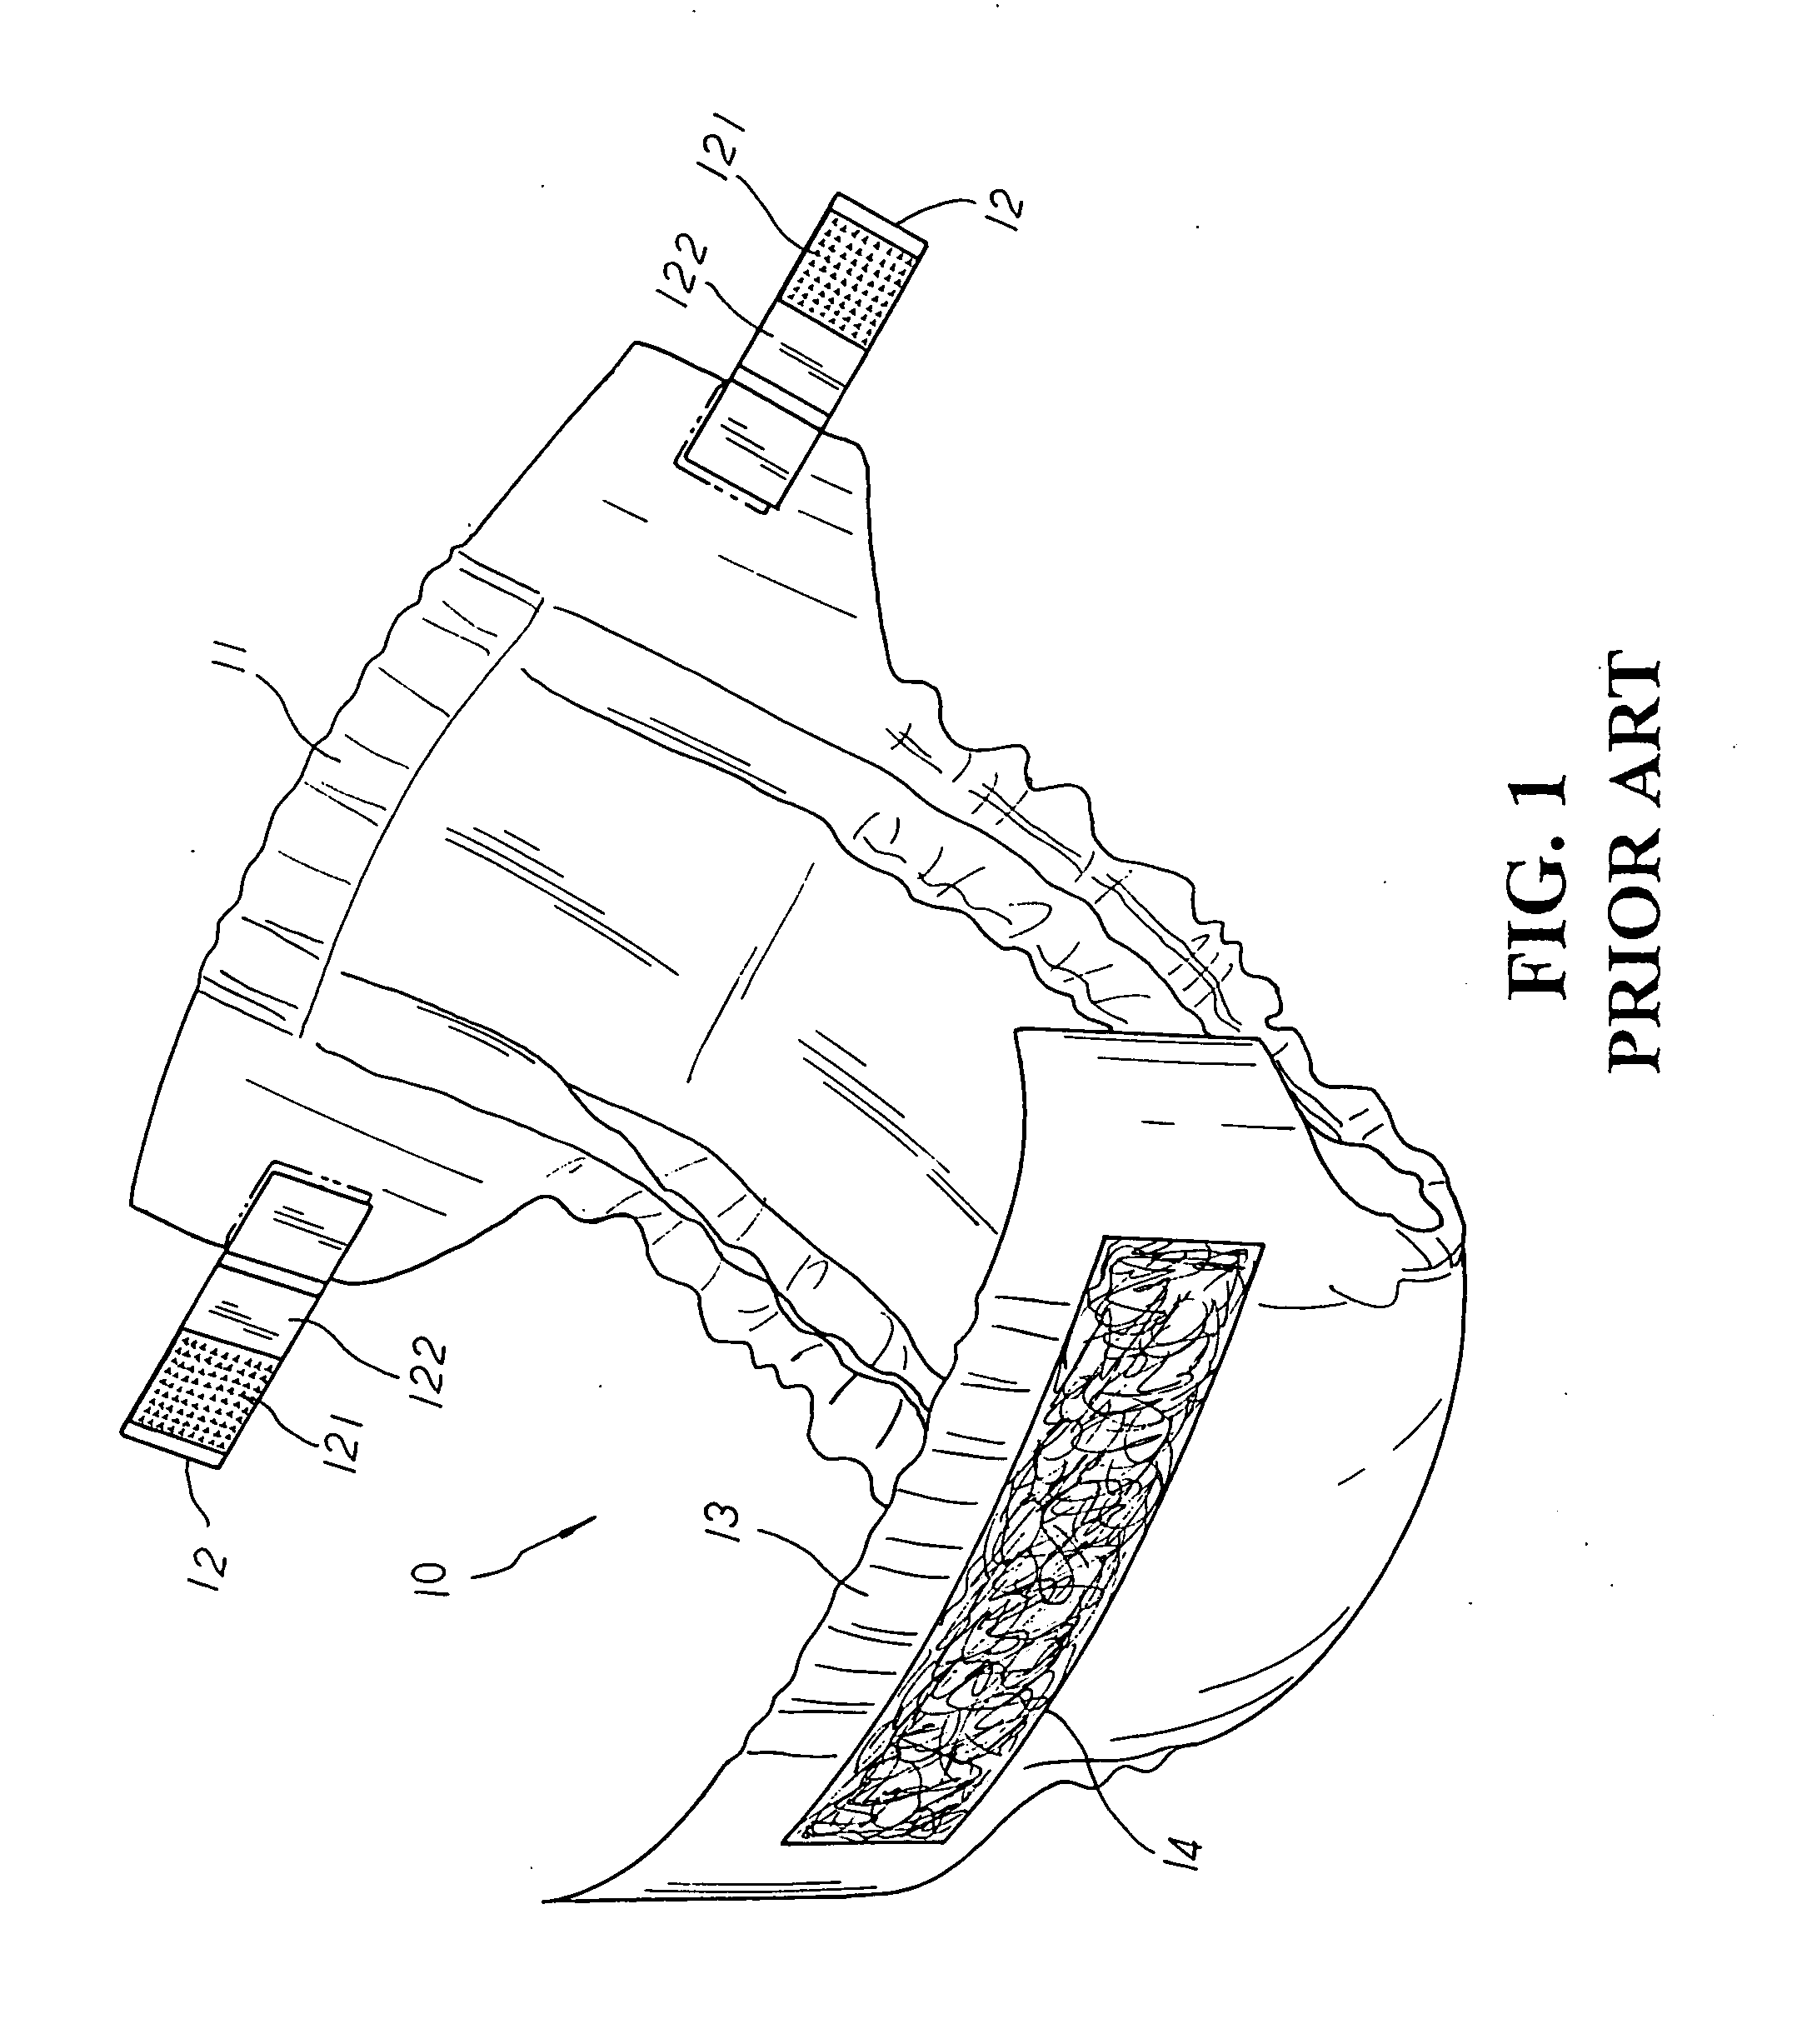 Buckling device for disposable articles